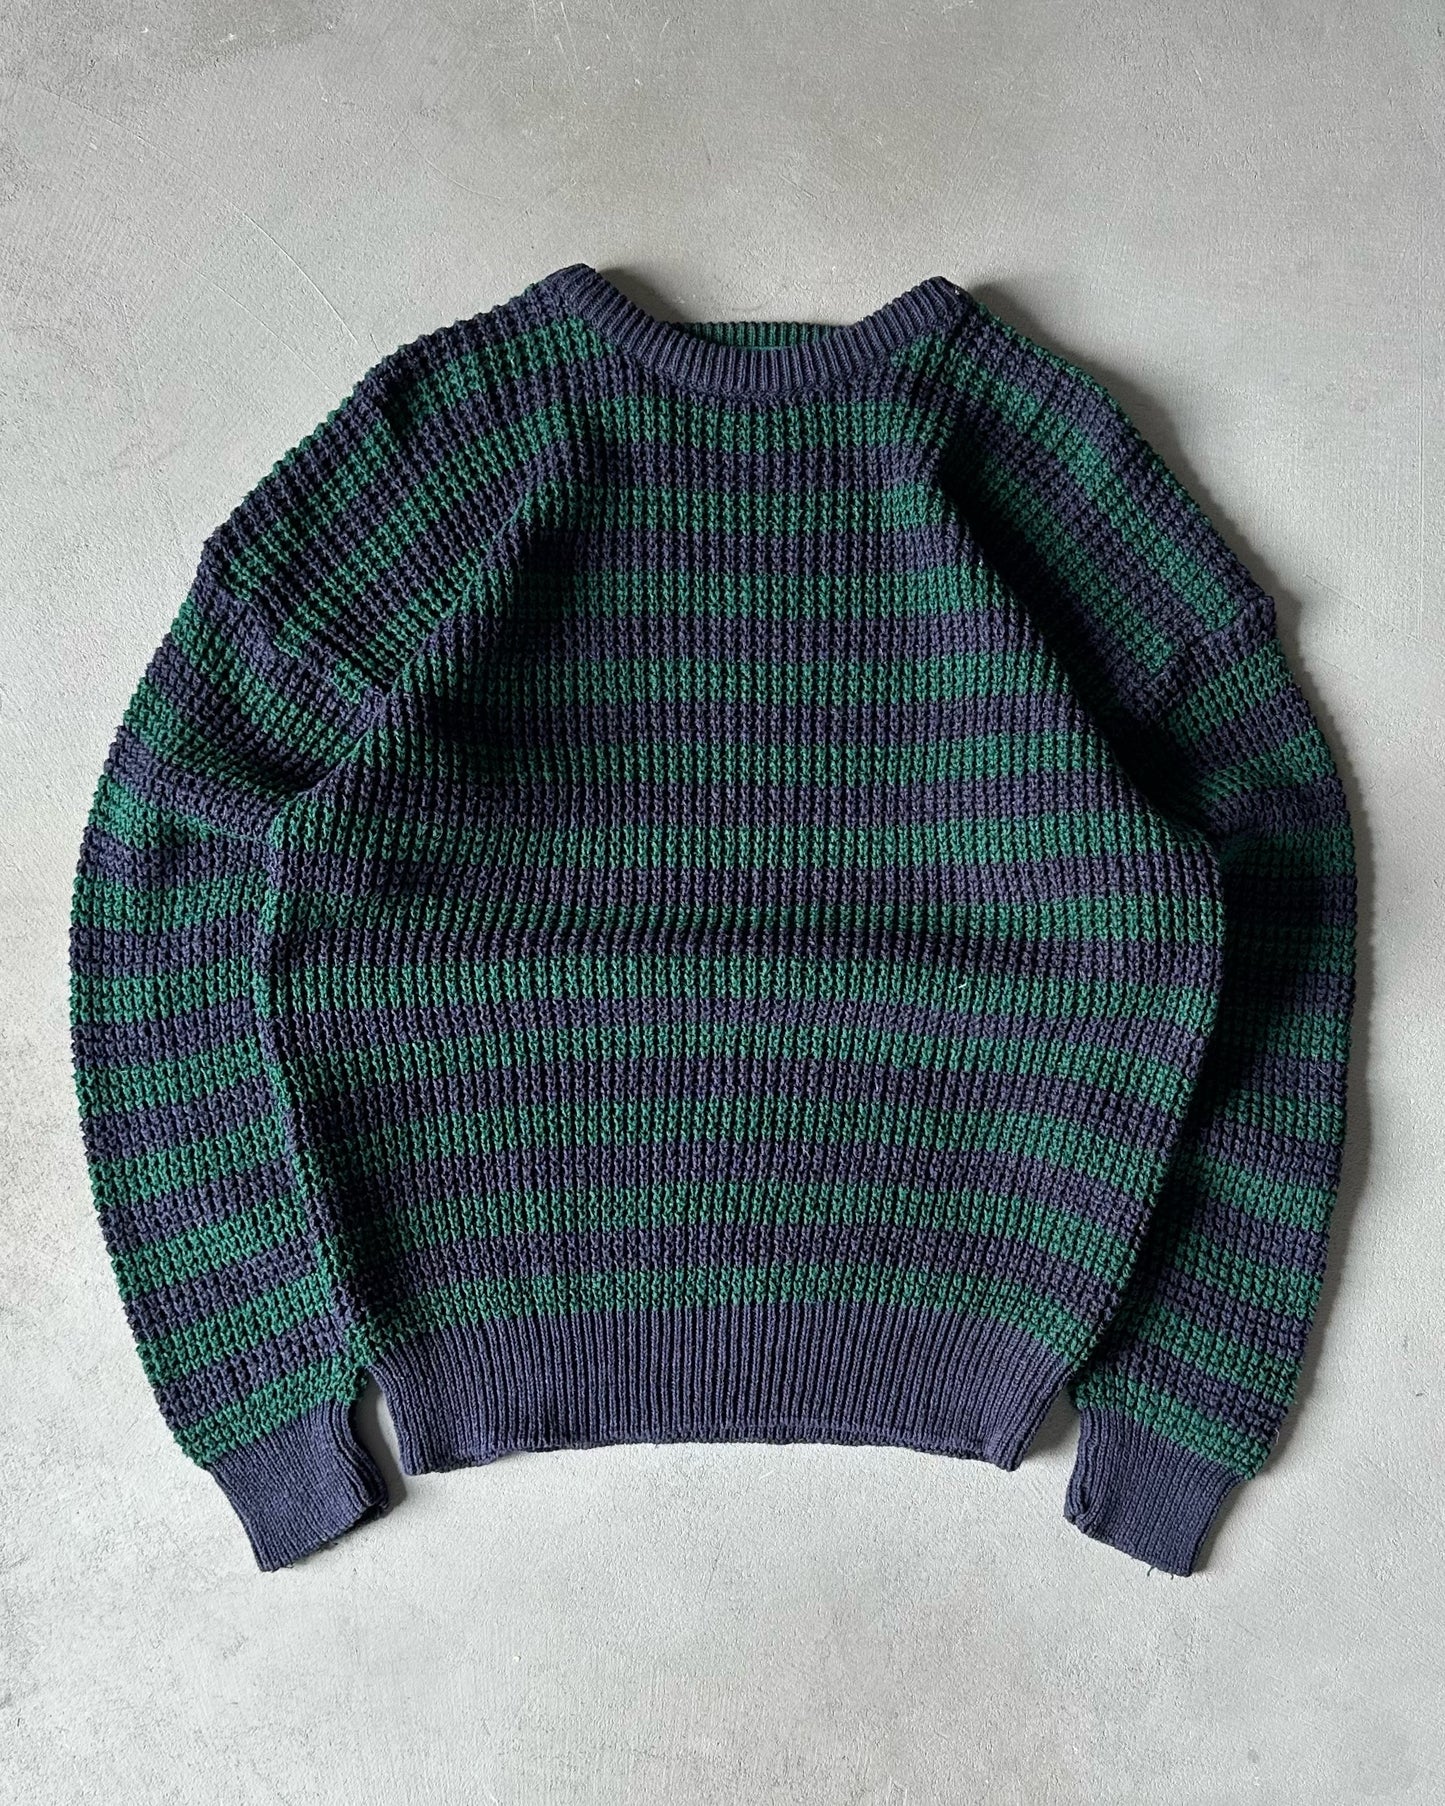 1990s - Navy/Green Striped Cotton Sweater - M/L